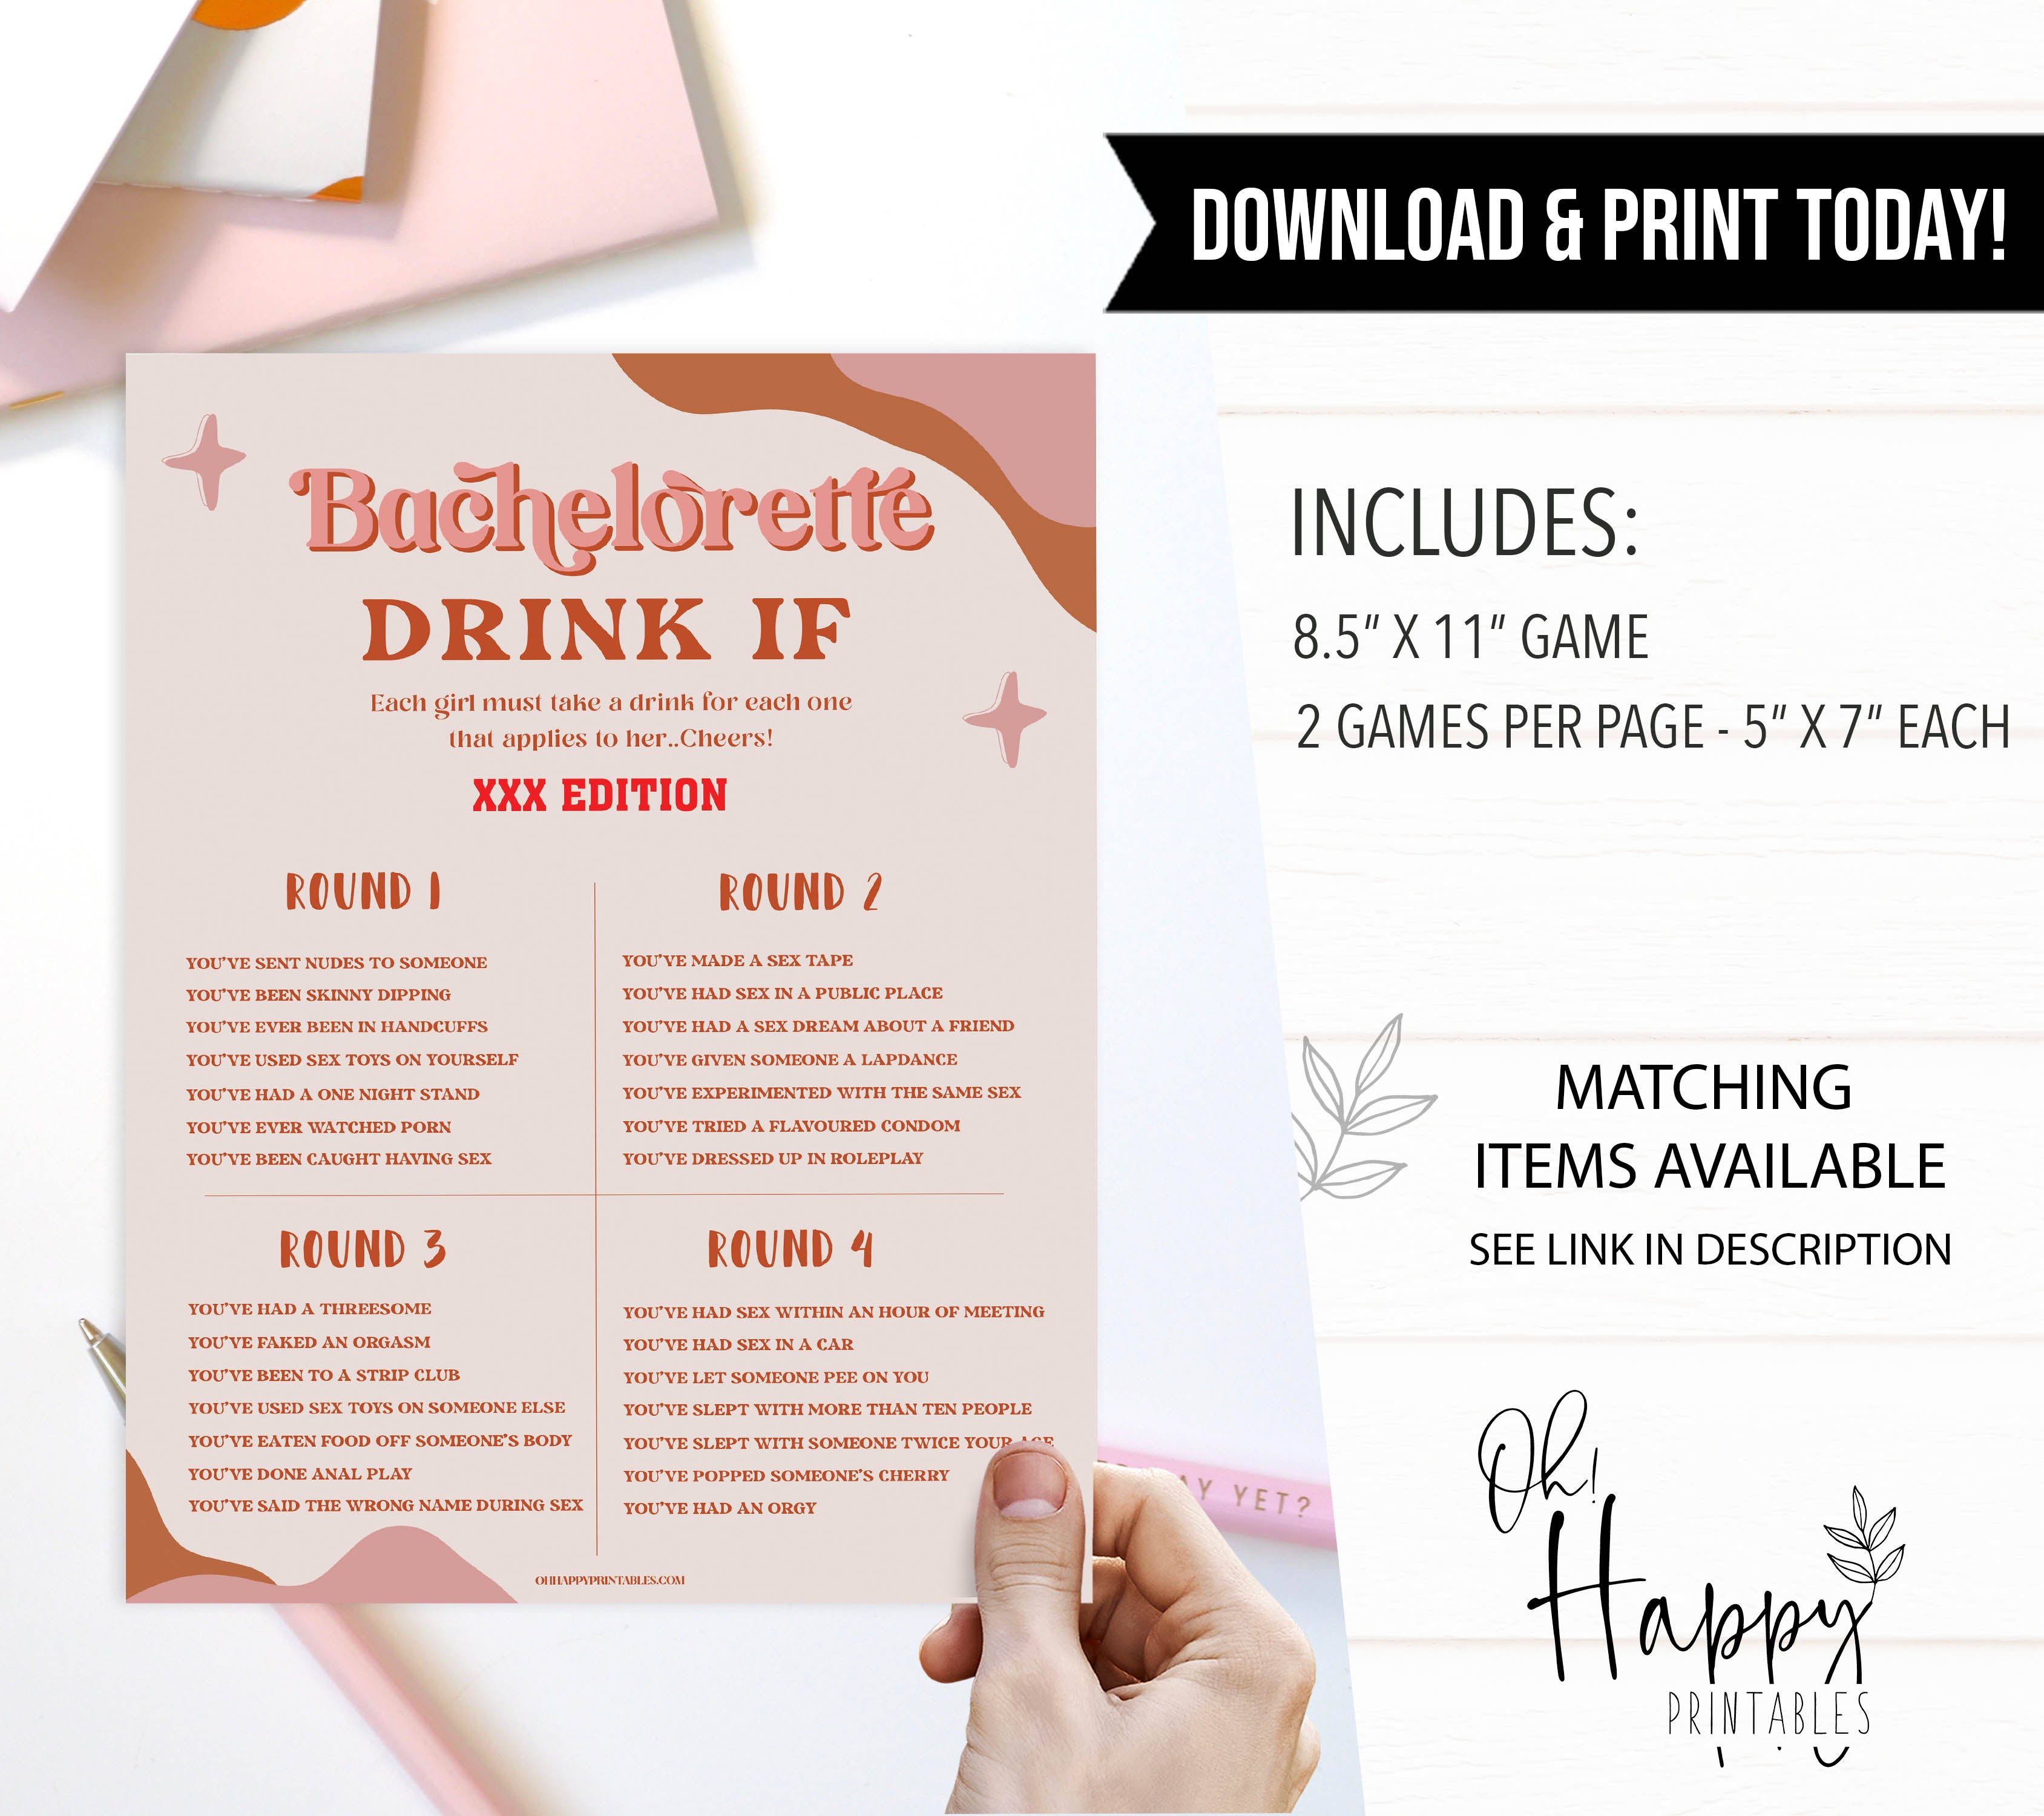 bachelorette drink if game, adult party games, 70s retro bridal shower, retro bridal shower games, modern 70s bridal collection, 70s bridal shower, printable bridal games